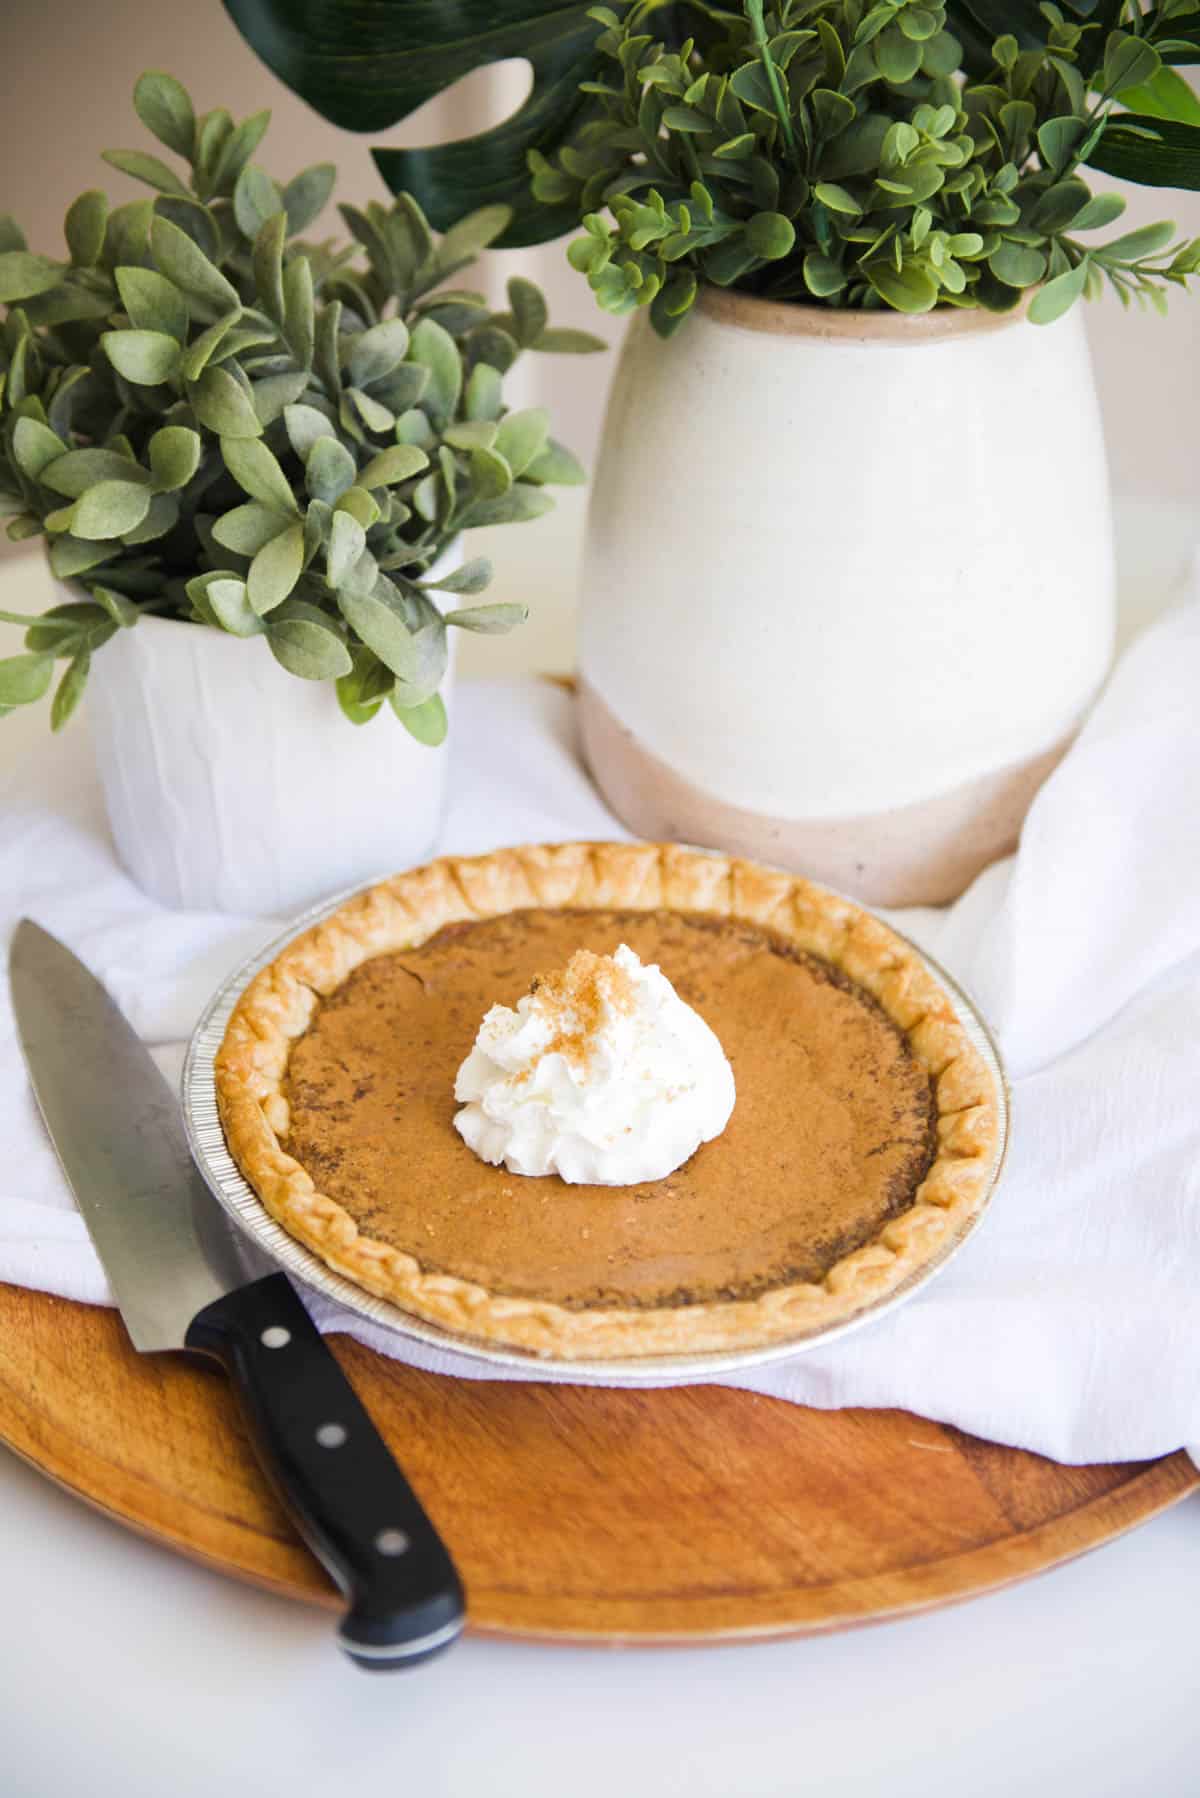 Brown Sugar Pie in a tin on a table next to a knife.